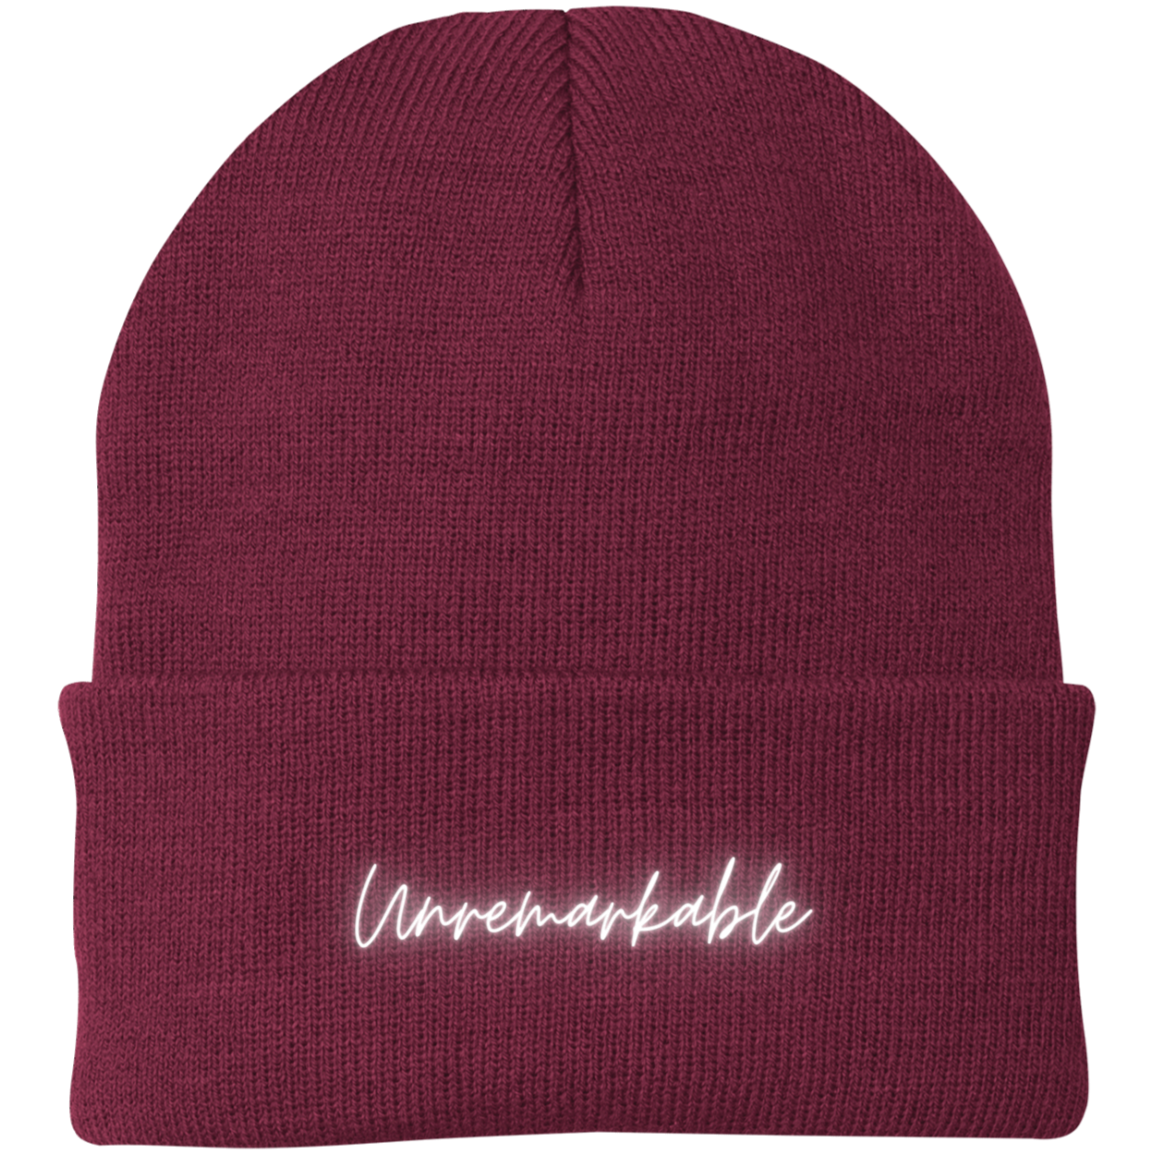 Unremarkable  Embroidered Knit Cap